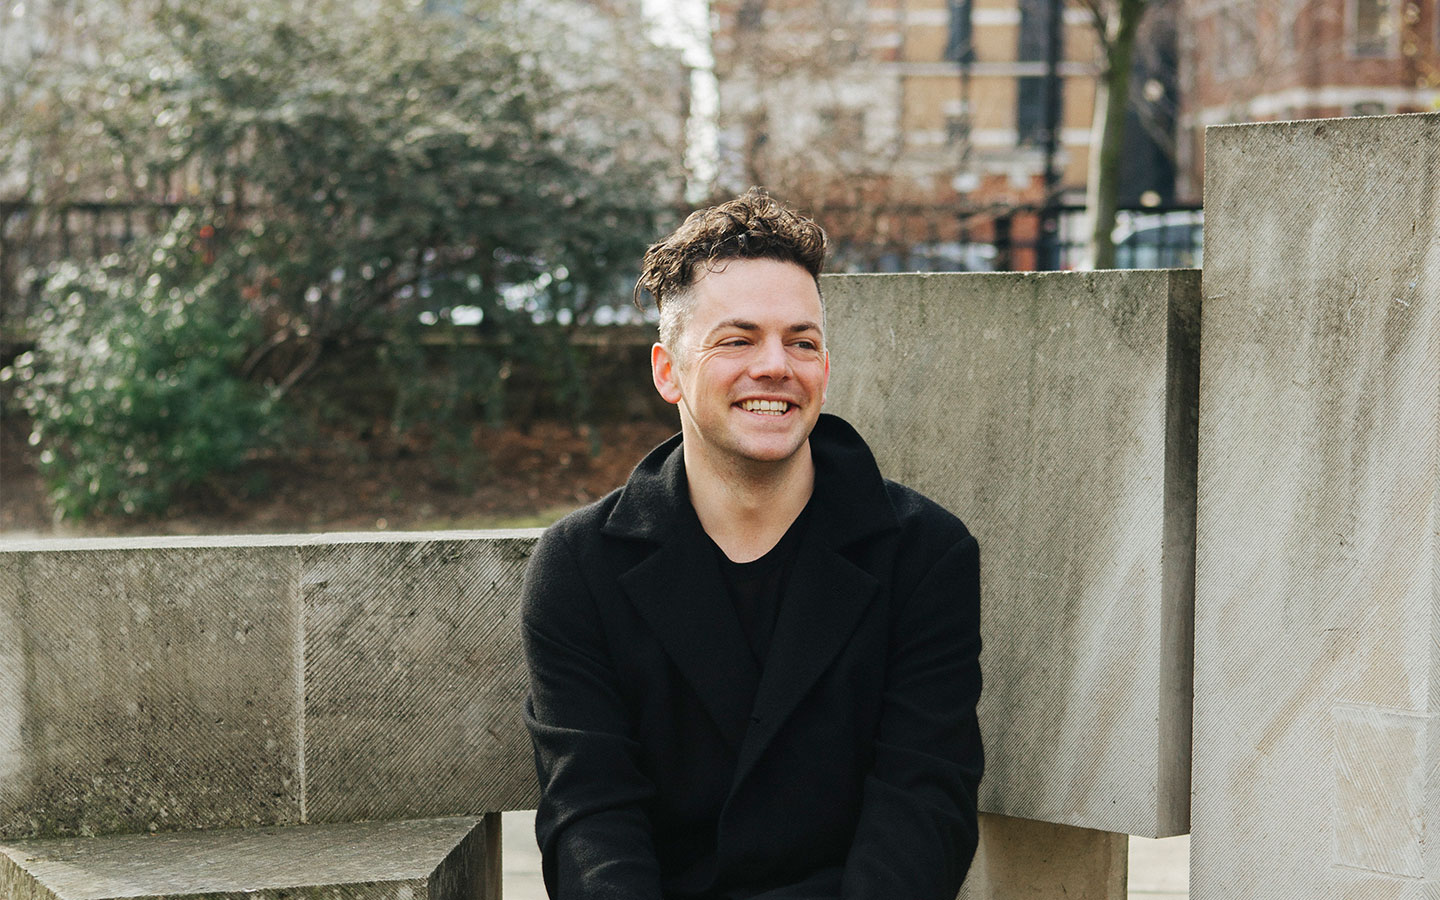 A portrait of Nico Muhly sitting on a wall